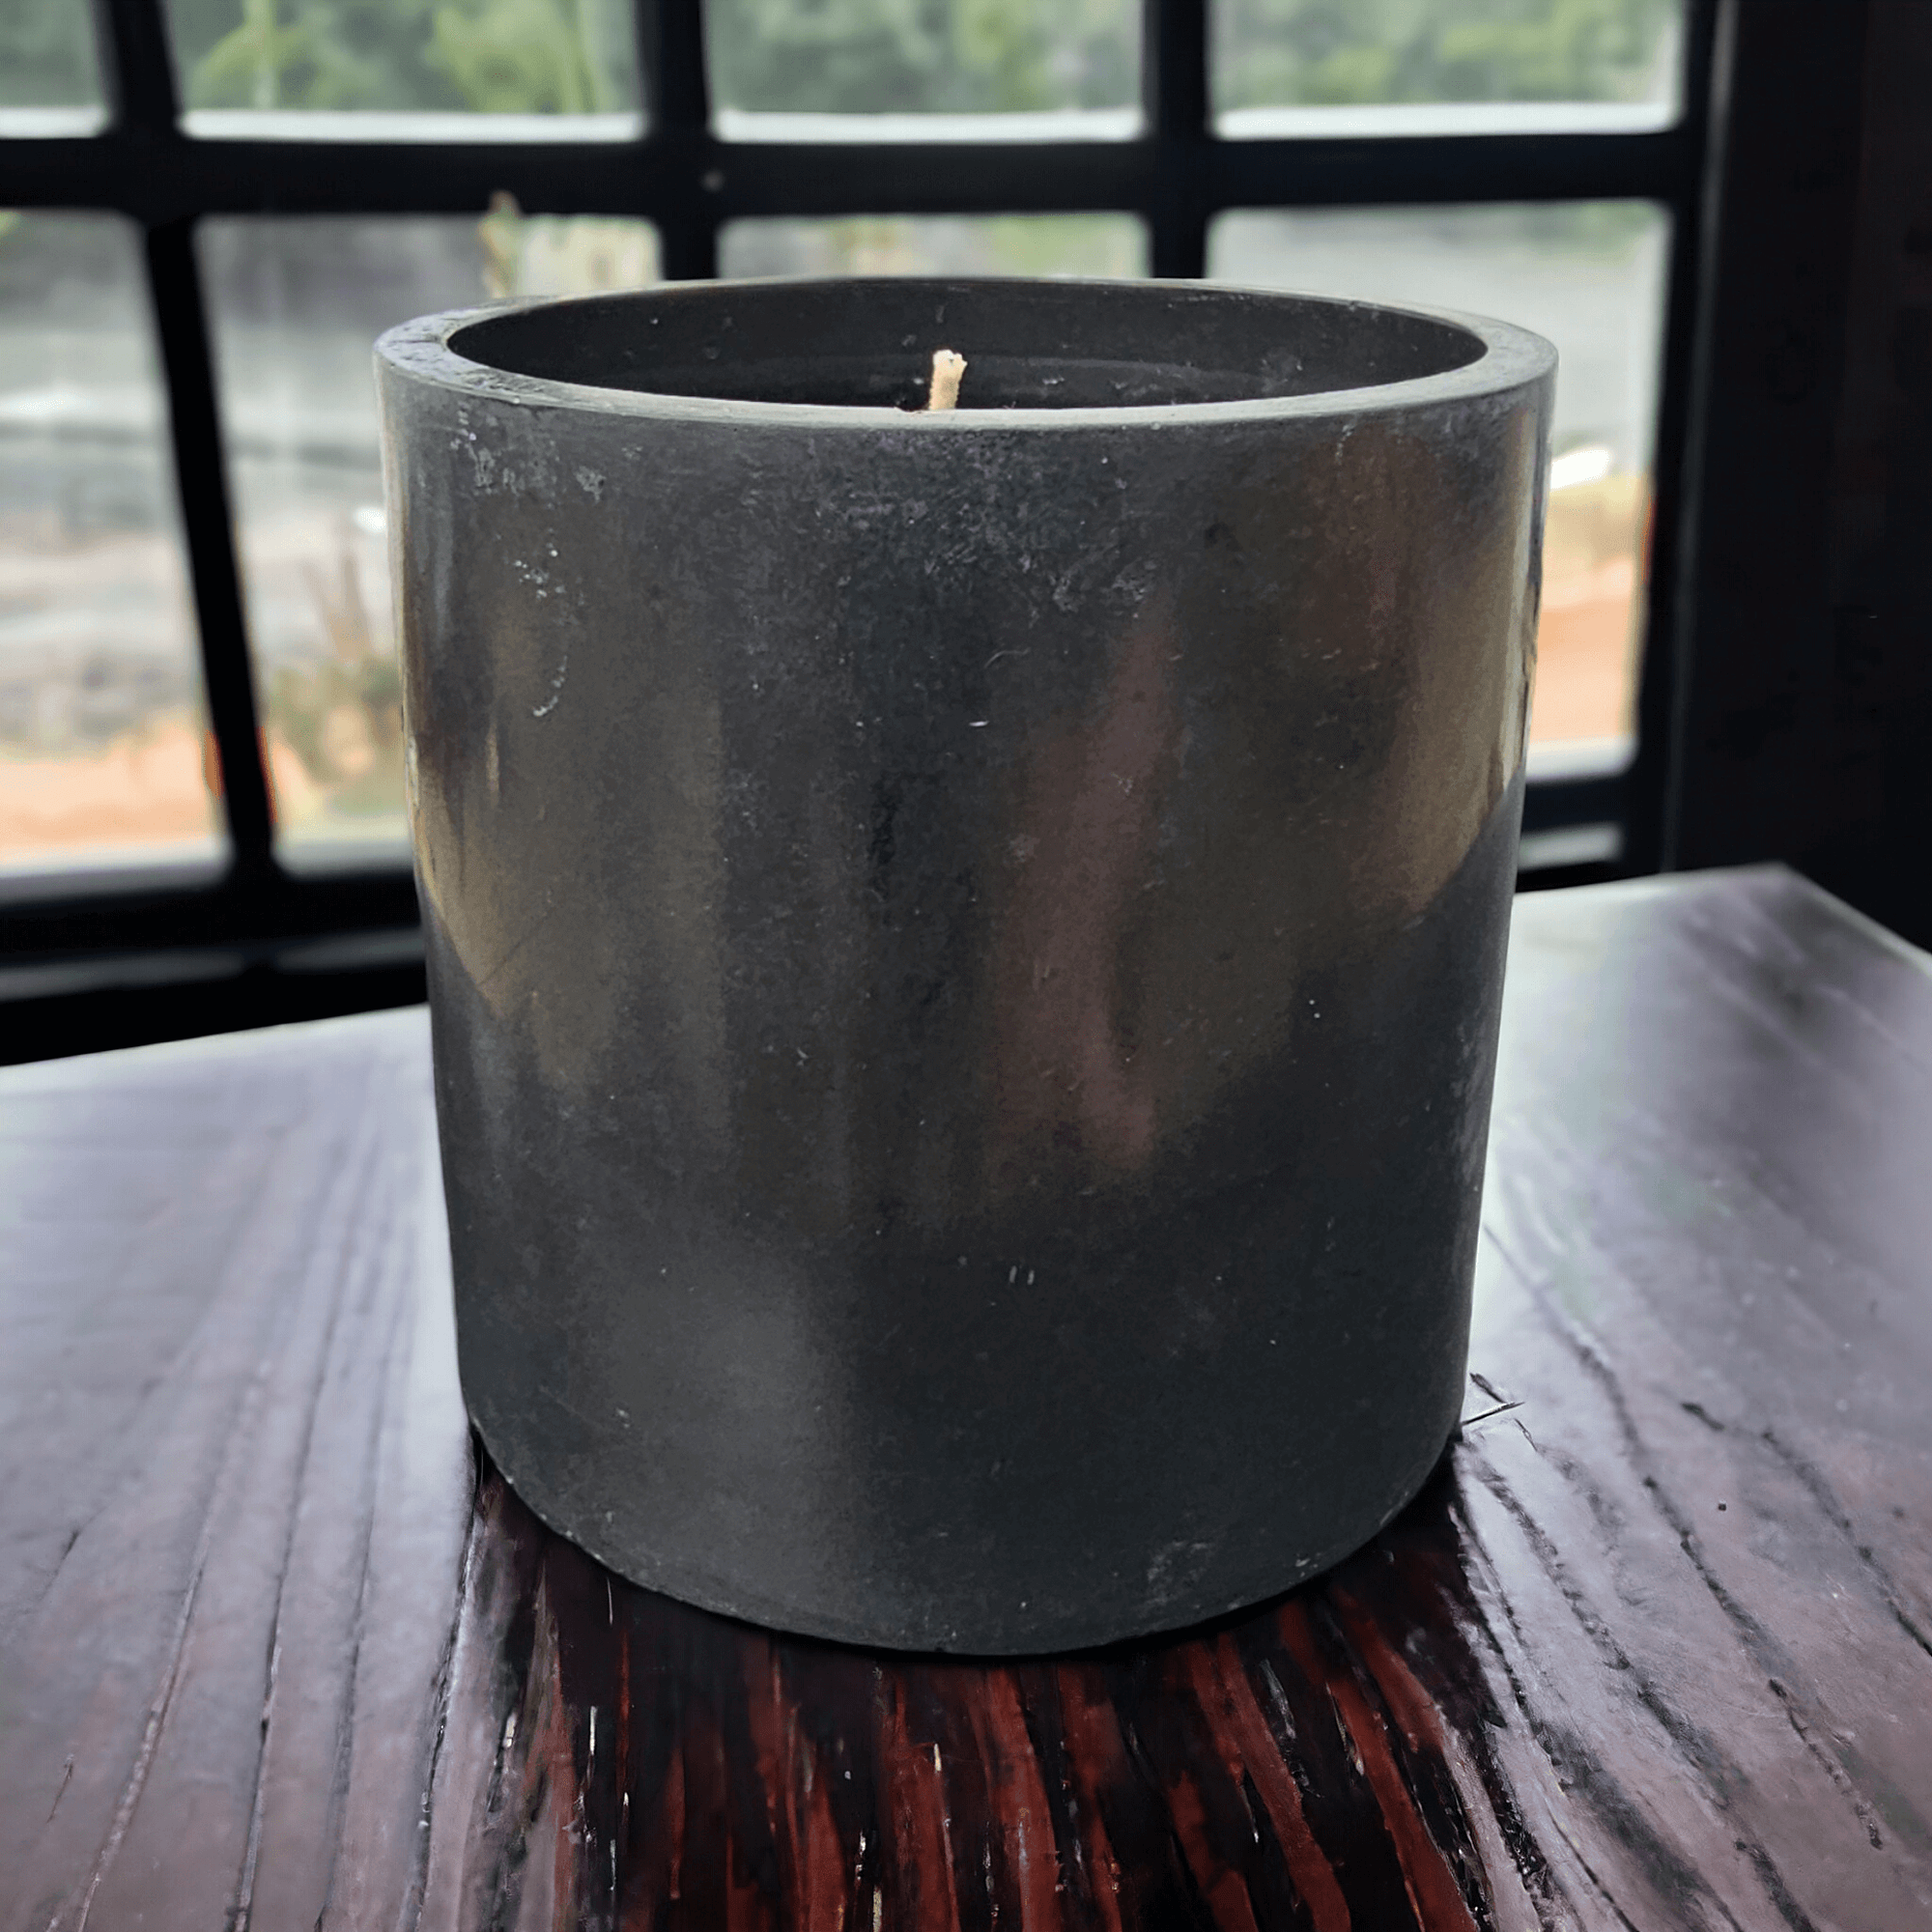 Flamingwick Candle Shop's cement vessel candle 🍎  apple cinnamon scented 